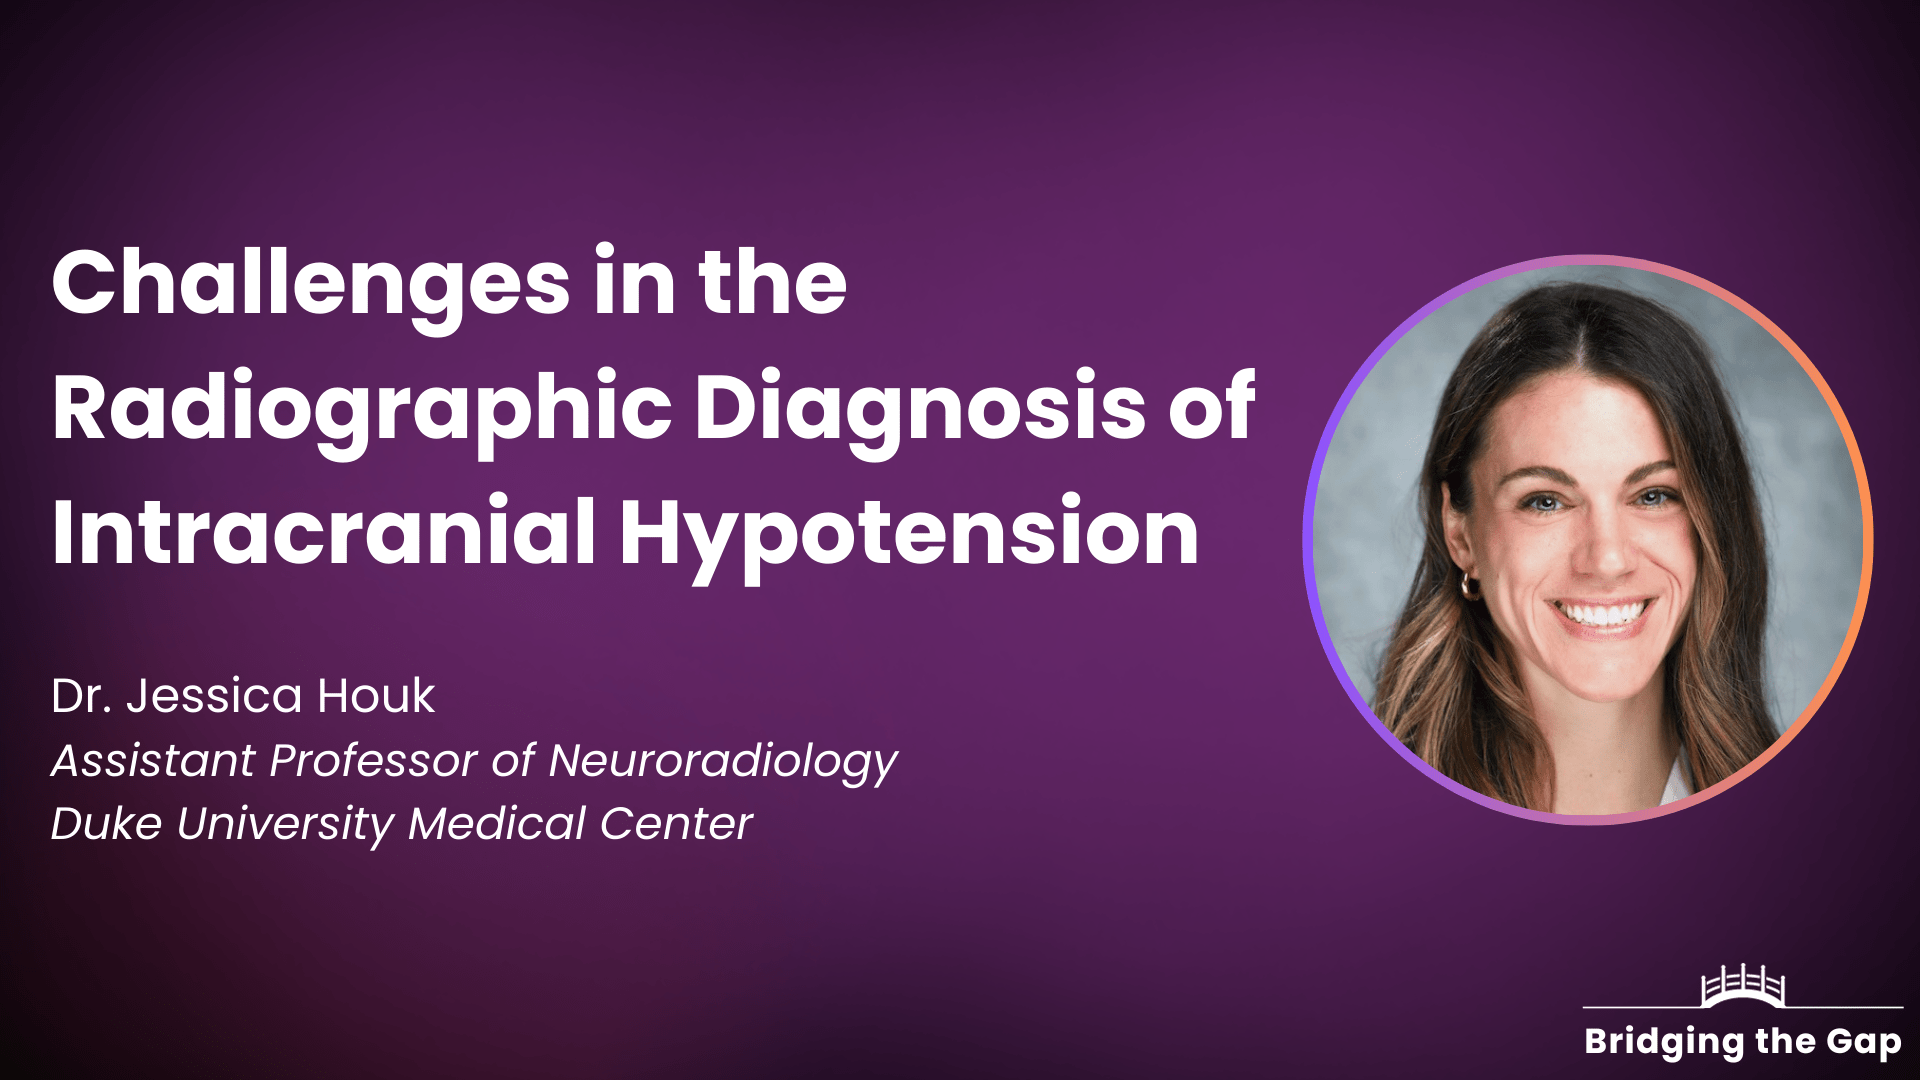 Dr. Jessica Houk: Challenges in the Radiographic Diagnosis of Intracranial Hypotension